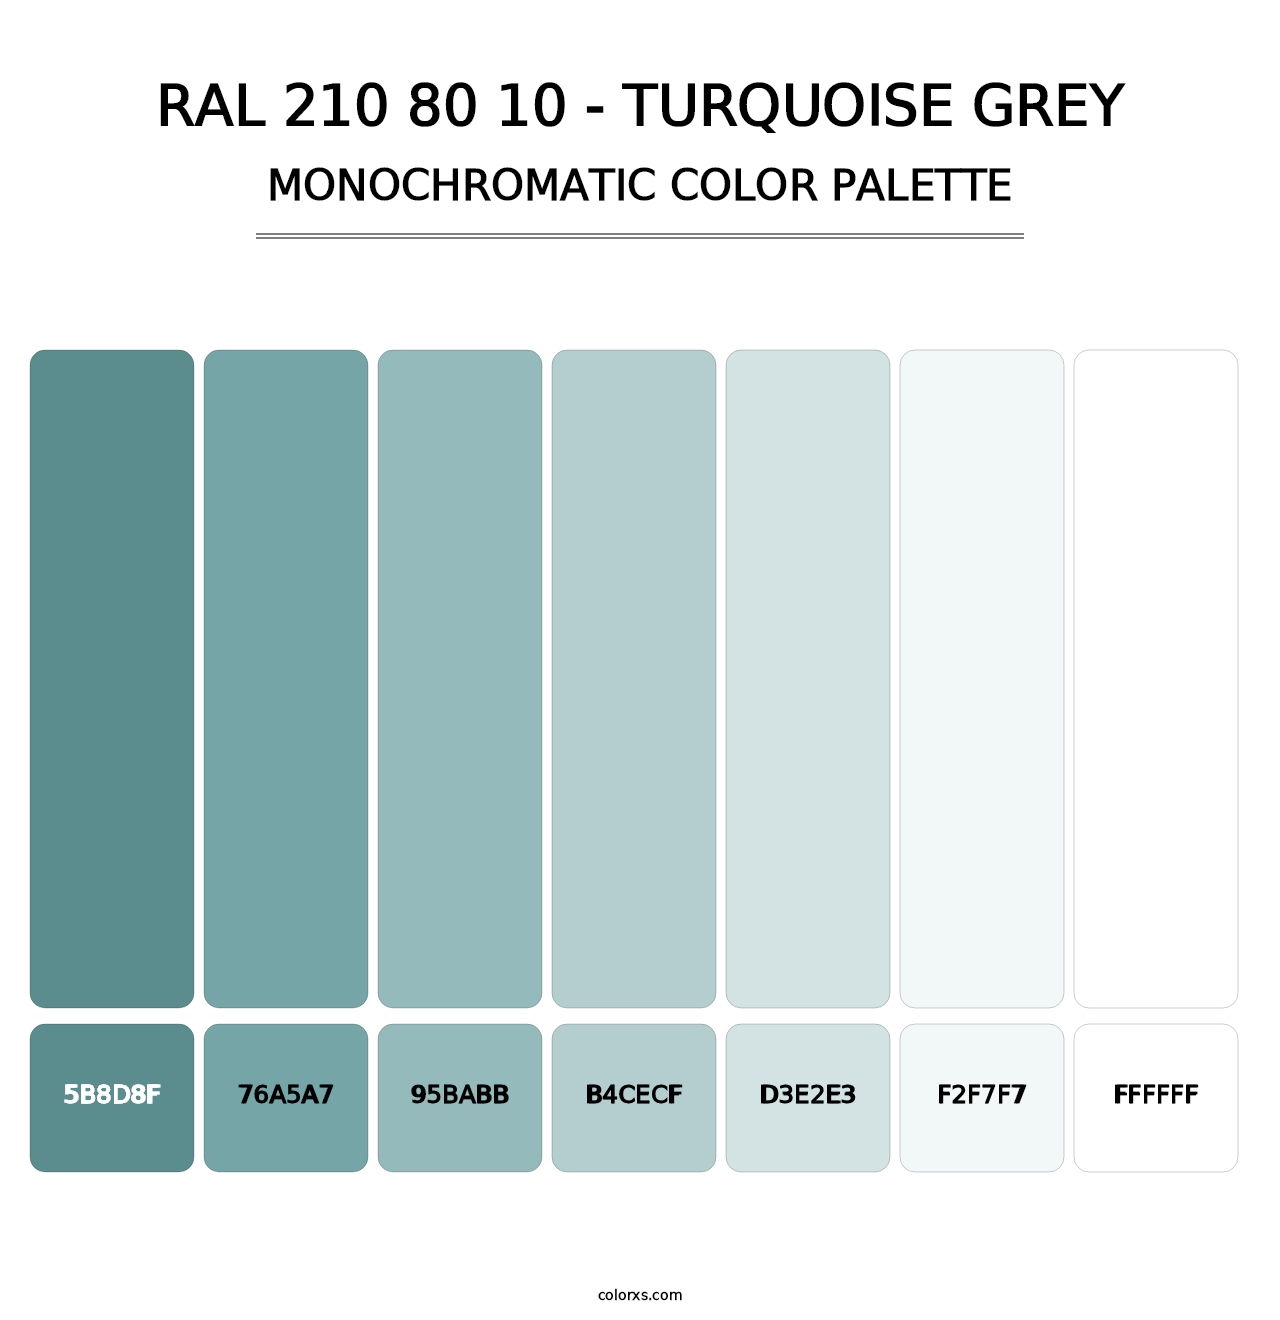 RAL 210 80 10 - Turquoise Grey - Monochromatic Color Palette